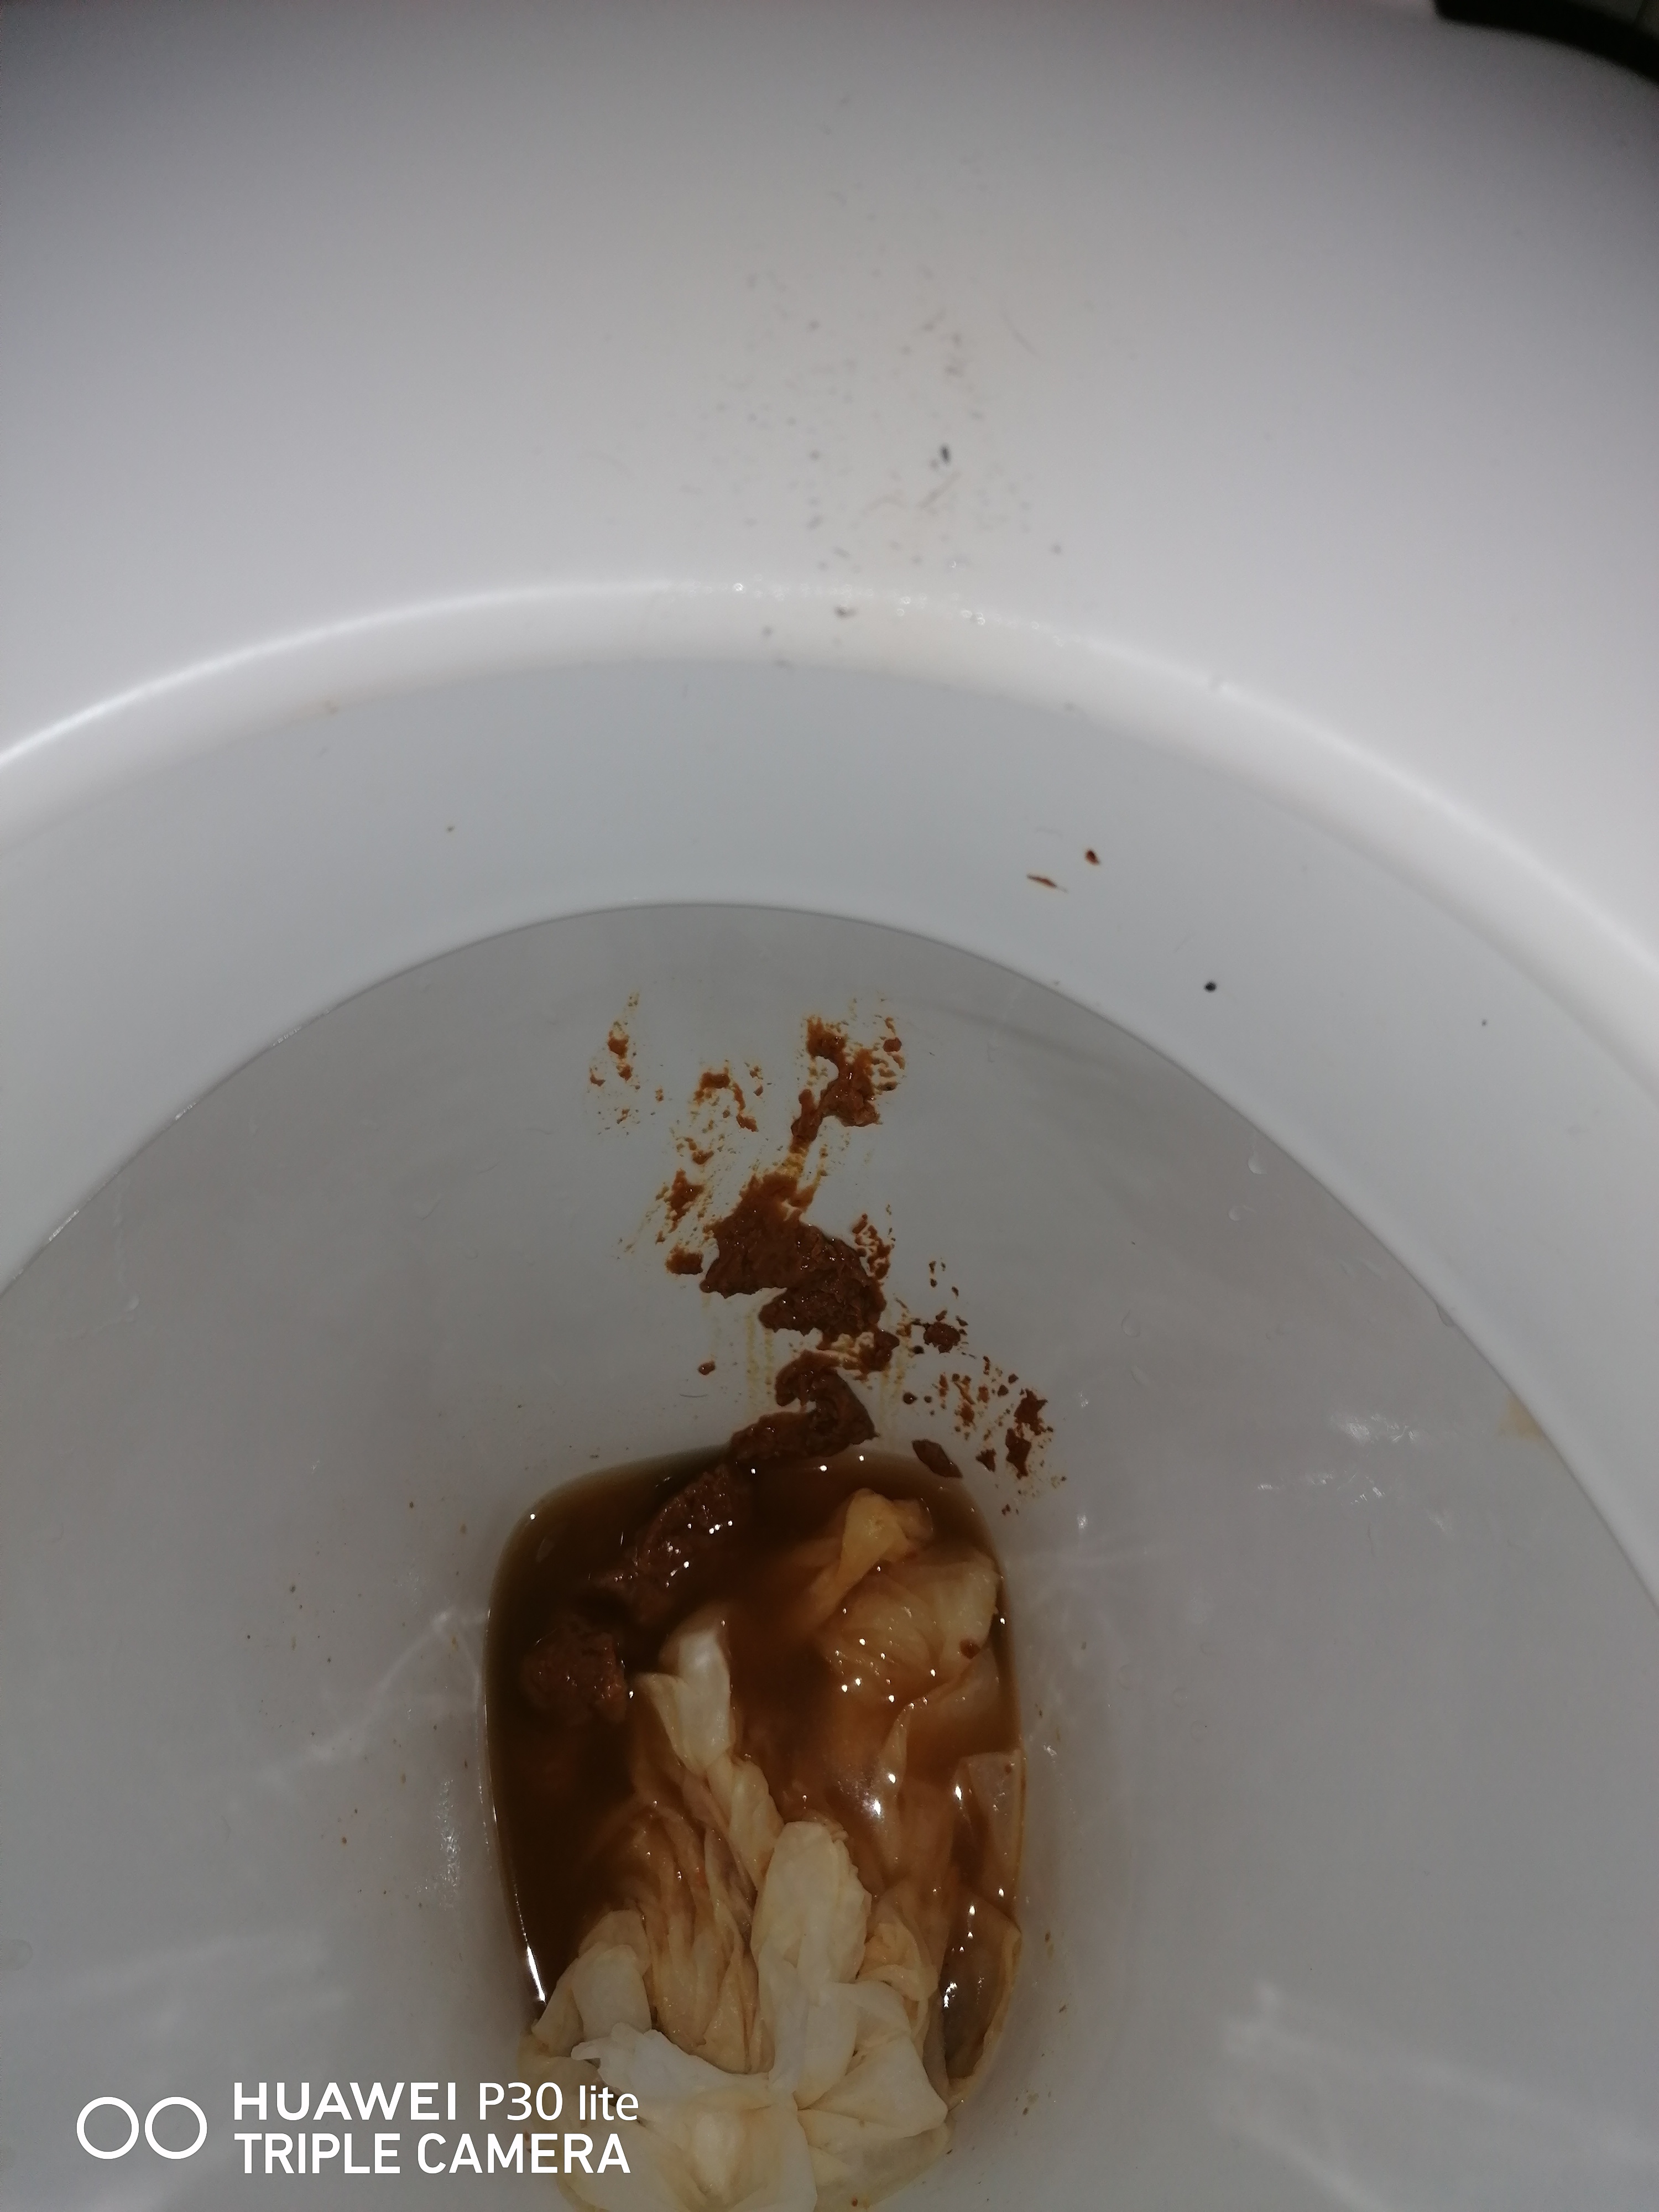 Shitting on my mates toilet after work again